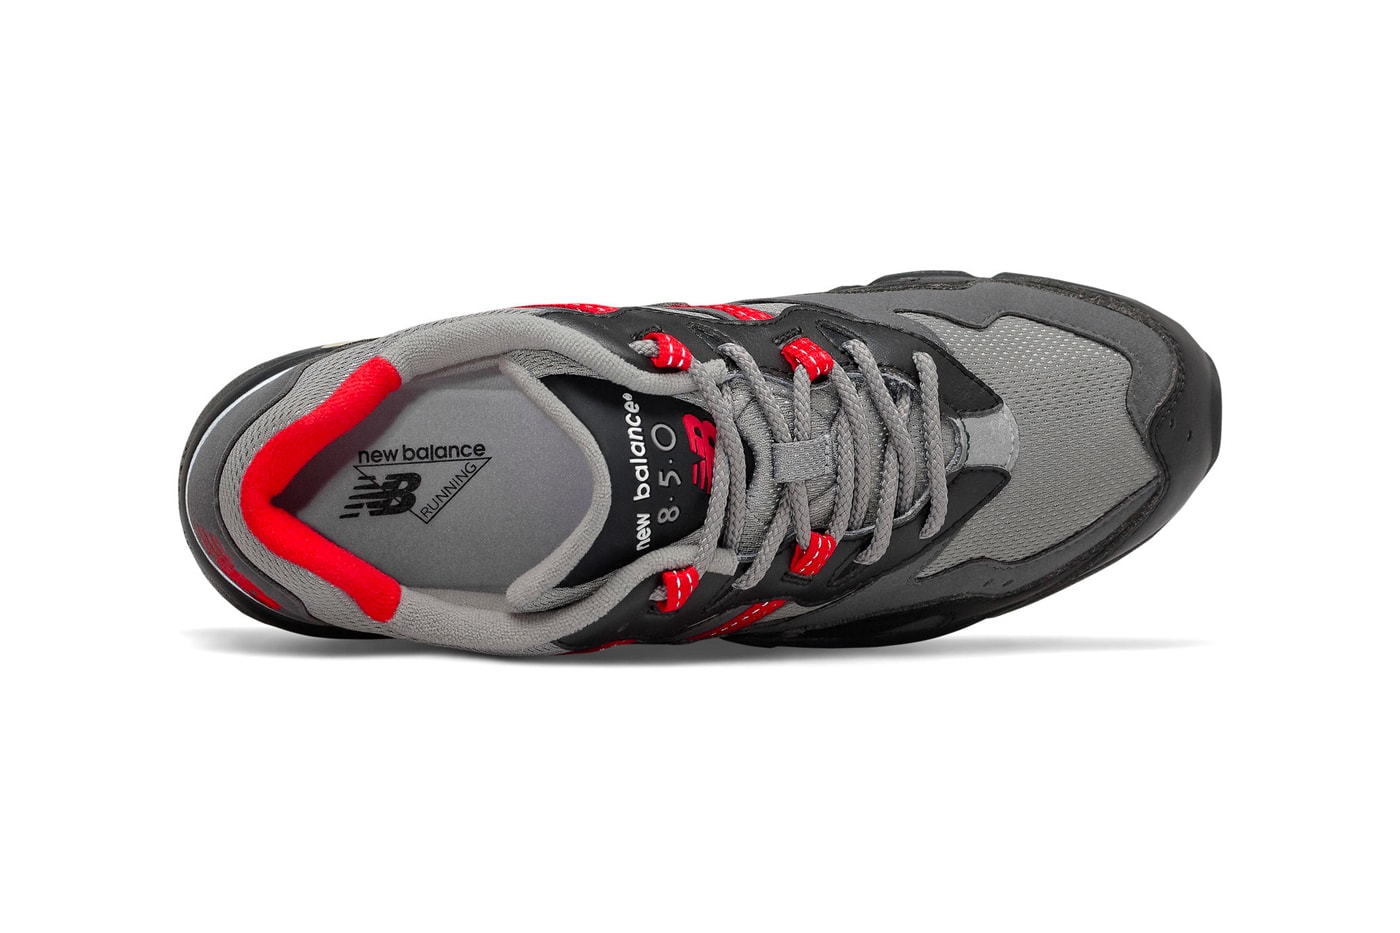 New Balance 850 Black Team Red gray sneakers shoes footwear kicks trainers runners menswear sneakers spring summer 2020 collection capsule silhouettes 1996 abzorb midsole